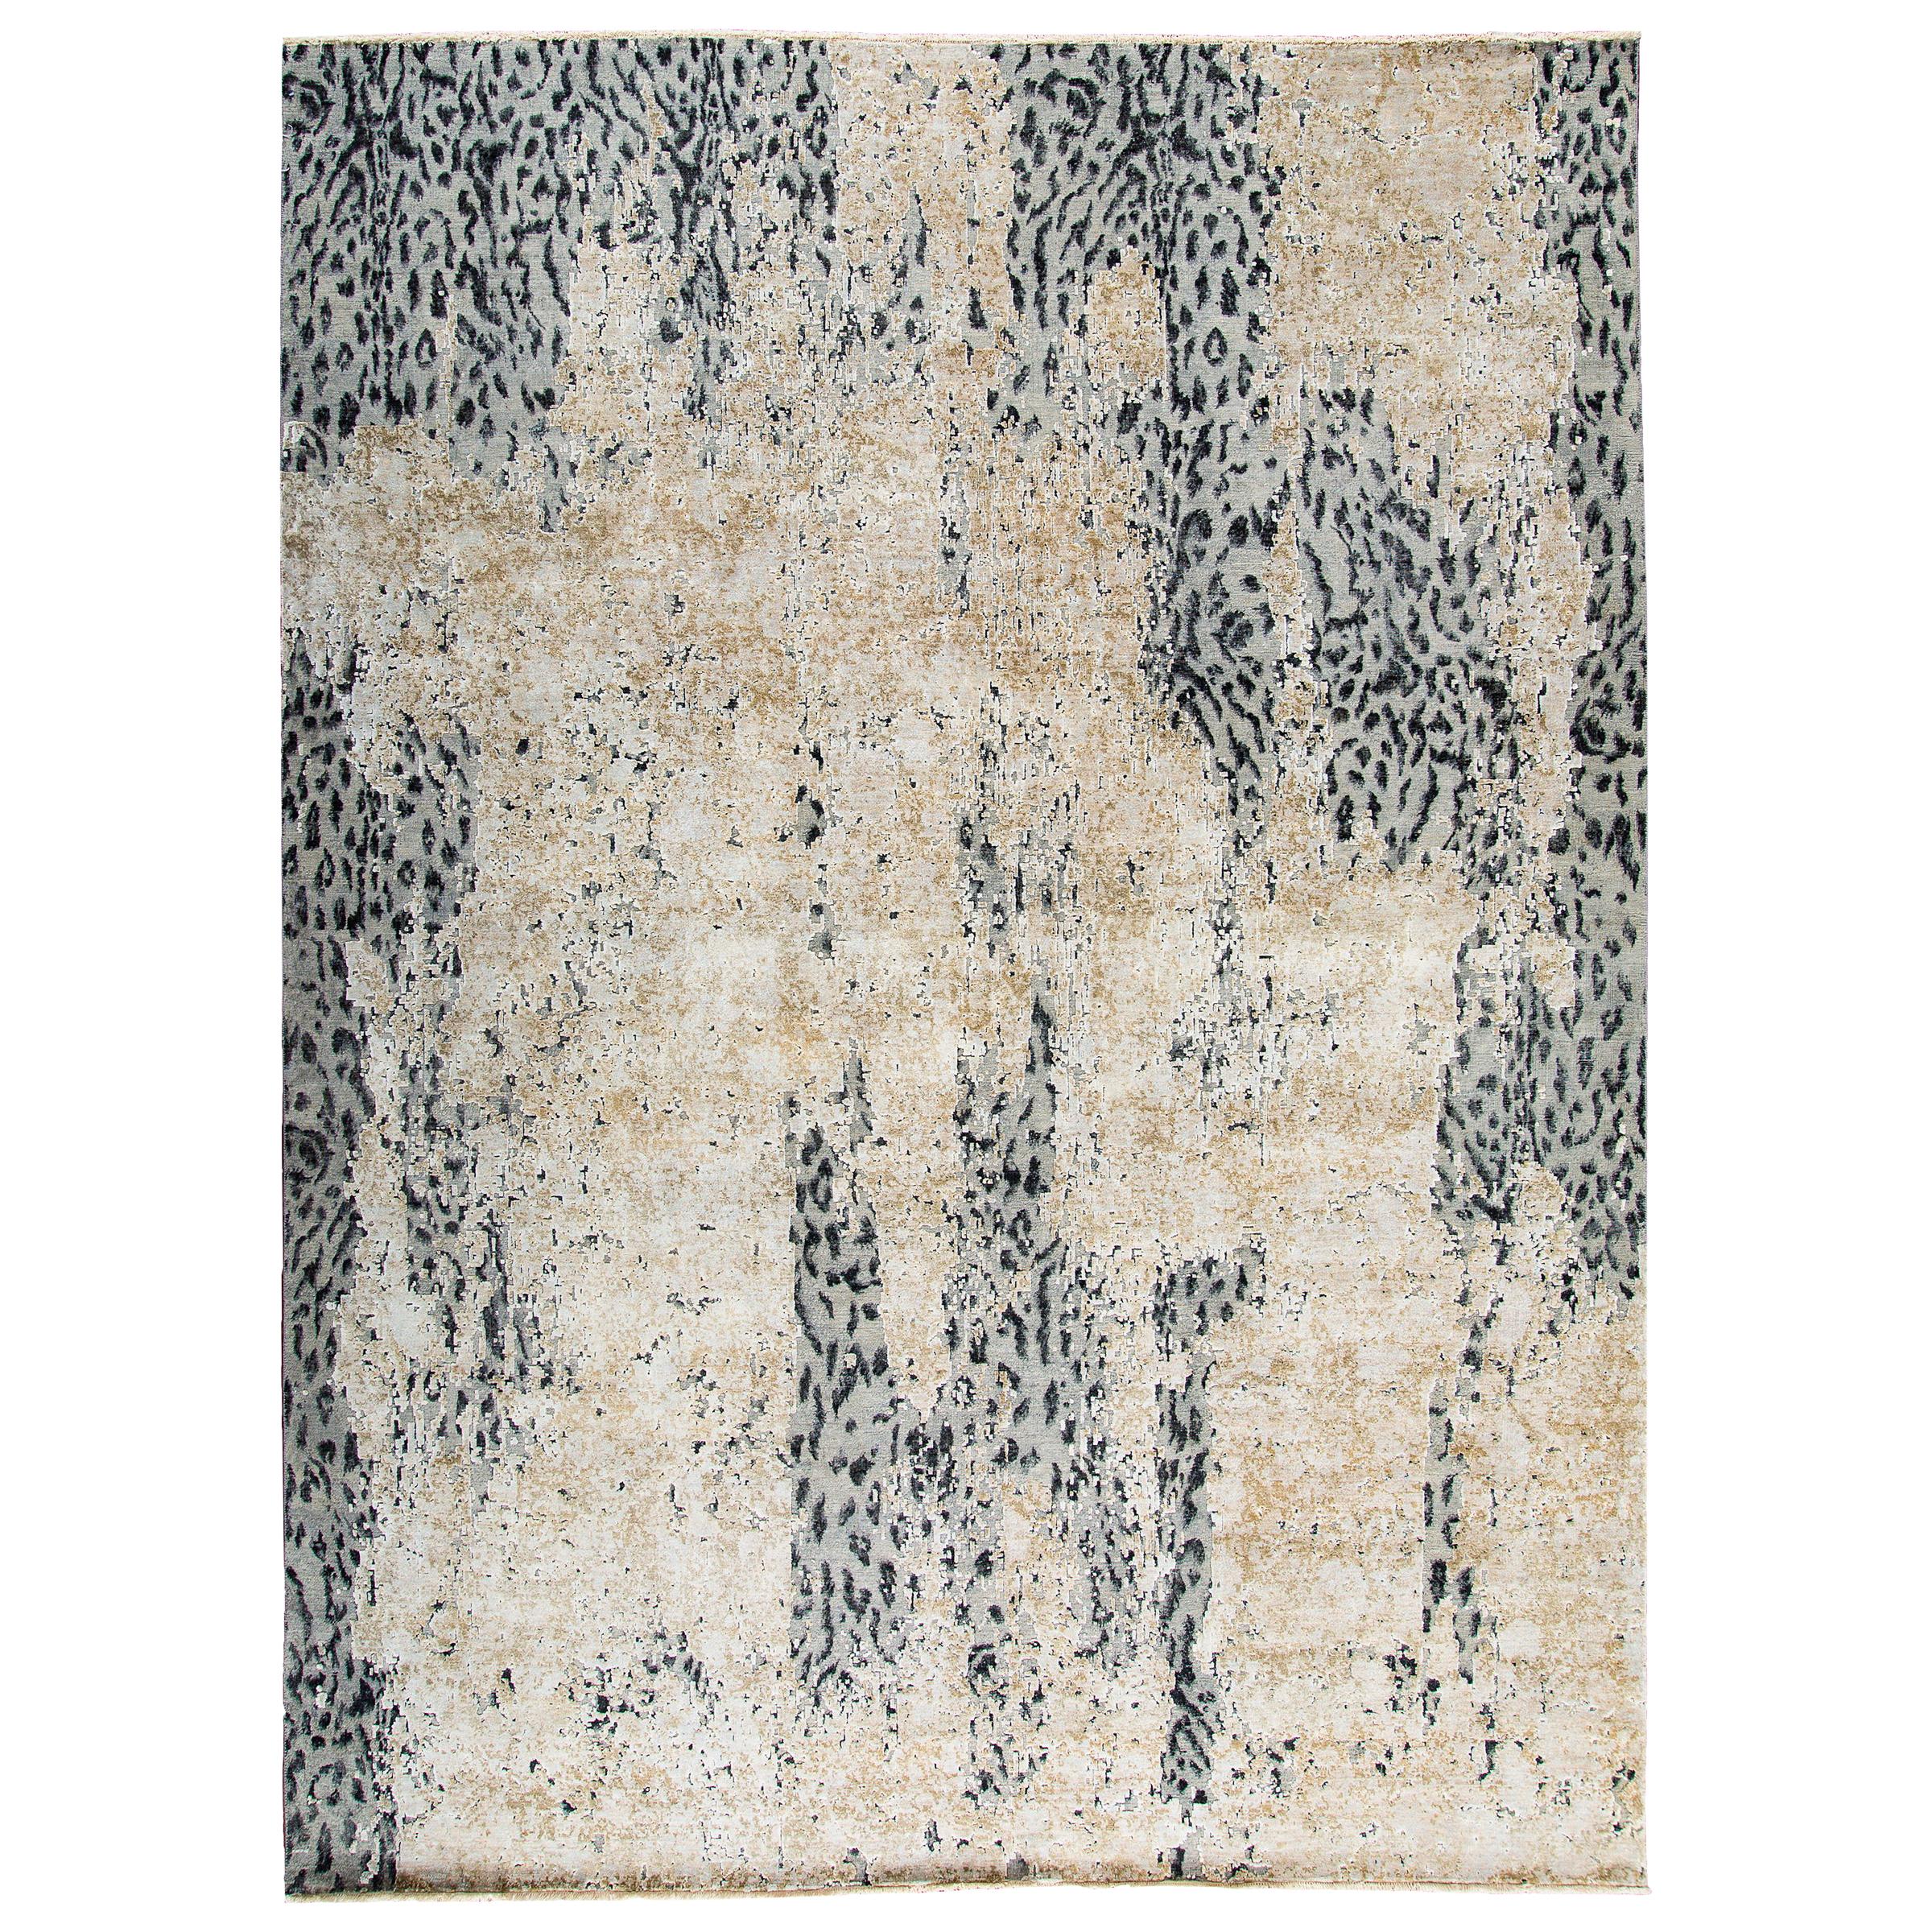 Contemporary Leopard Wool and Silk Hand-Knotted Indian Rug in Gray and Creme